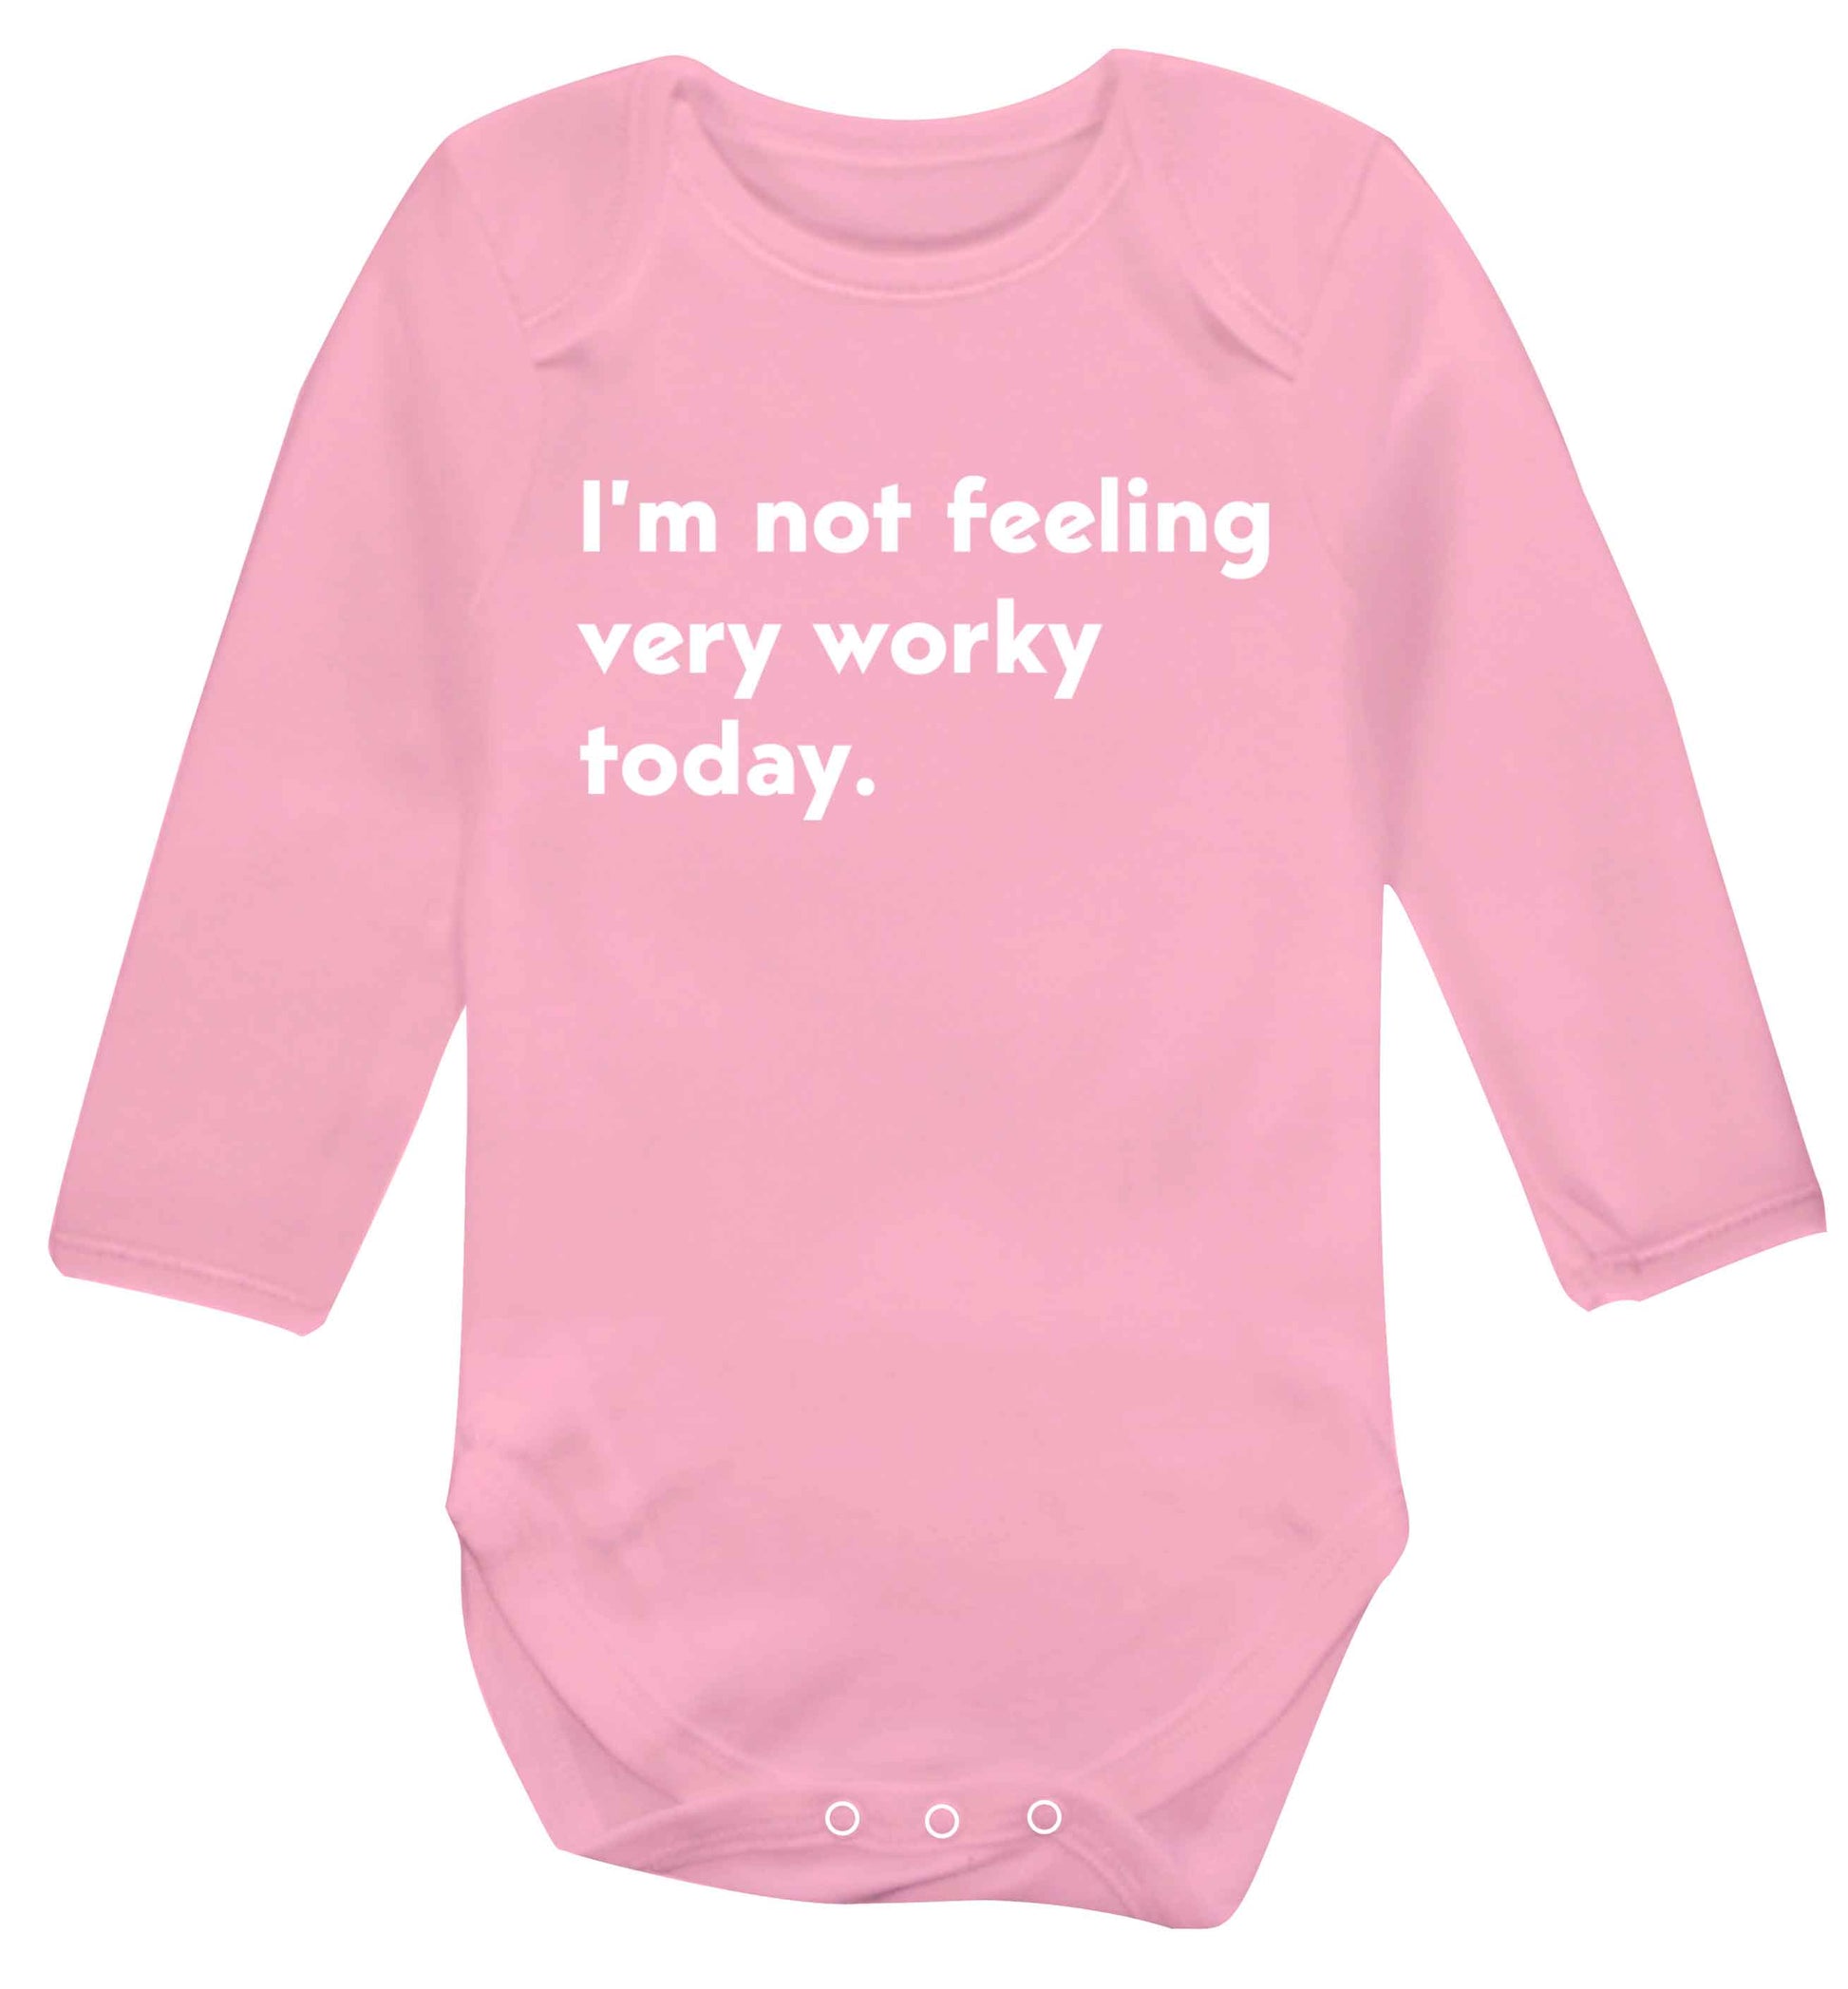 I'm not feeling very worky today Baby Vest long sleeved pale pink 6-12 months